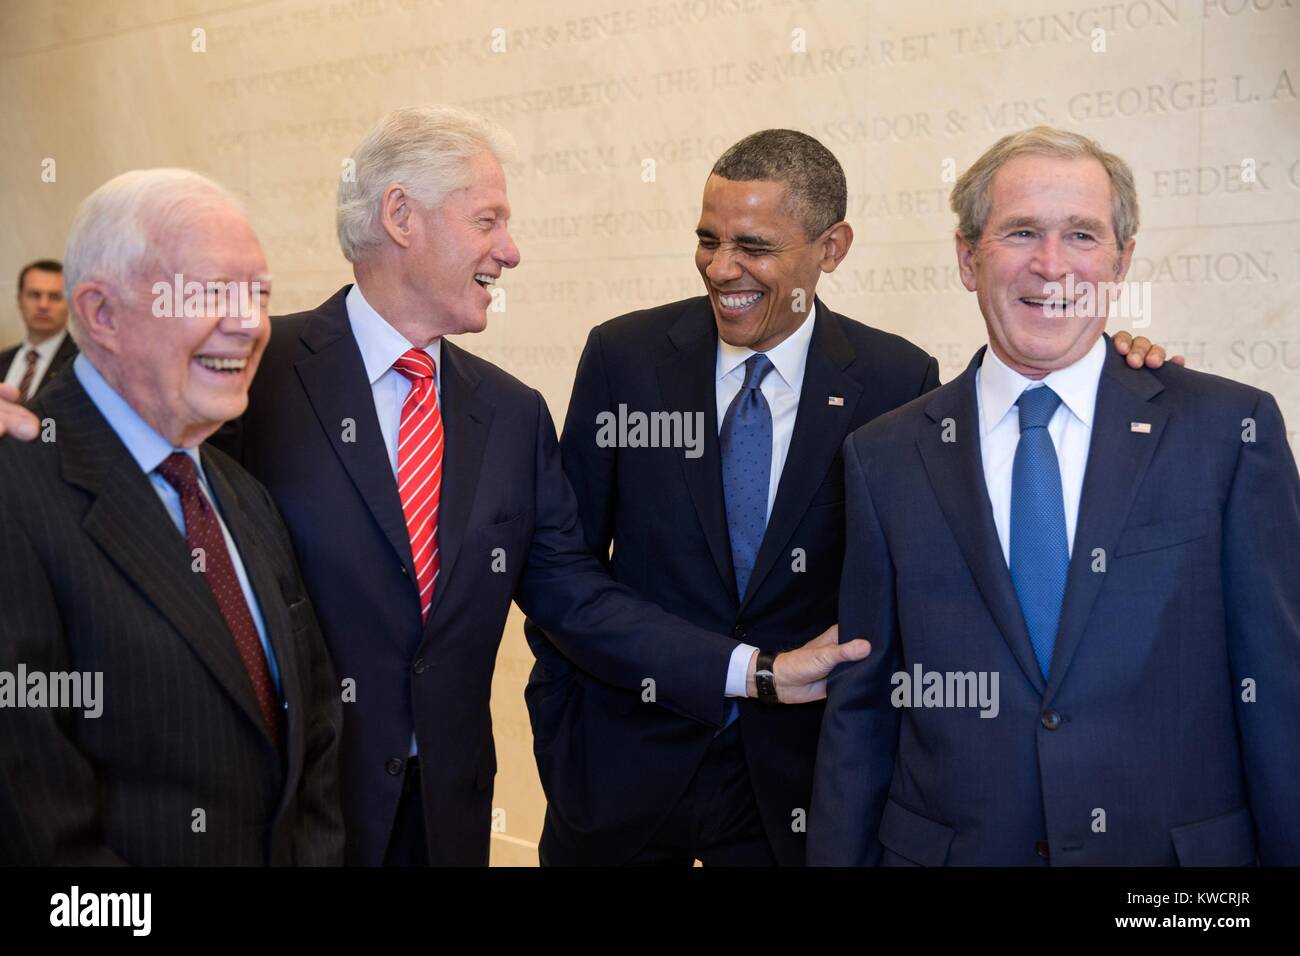 President Barack Obama laughs with former Presidents Jimmy Carter, Bill Clinton, and George W. Bush. April 25, 2013. They were attending the dedication of the George W. Bush Presidential Library and Museum, Southern Methodist University, Dallas, Texas. (BSLOC 2015 3 53) Stock Photo